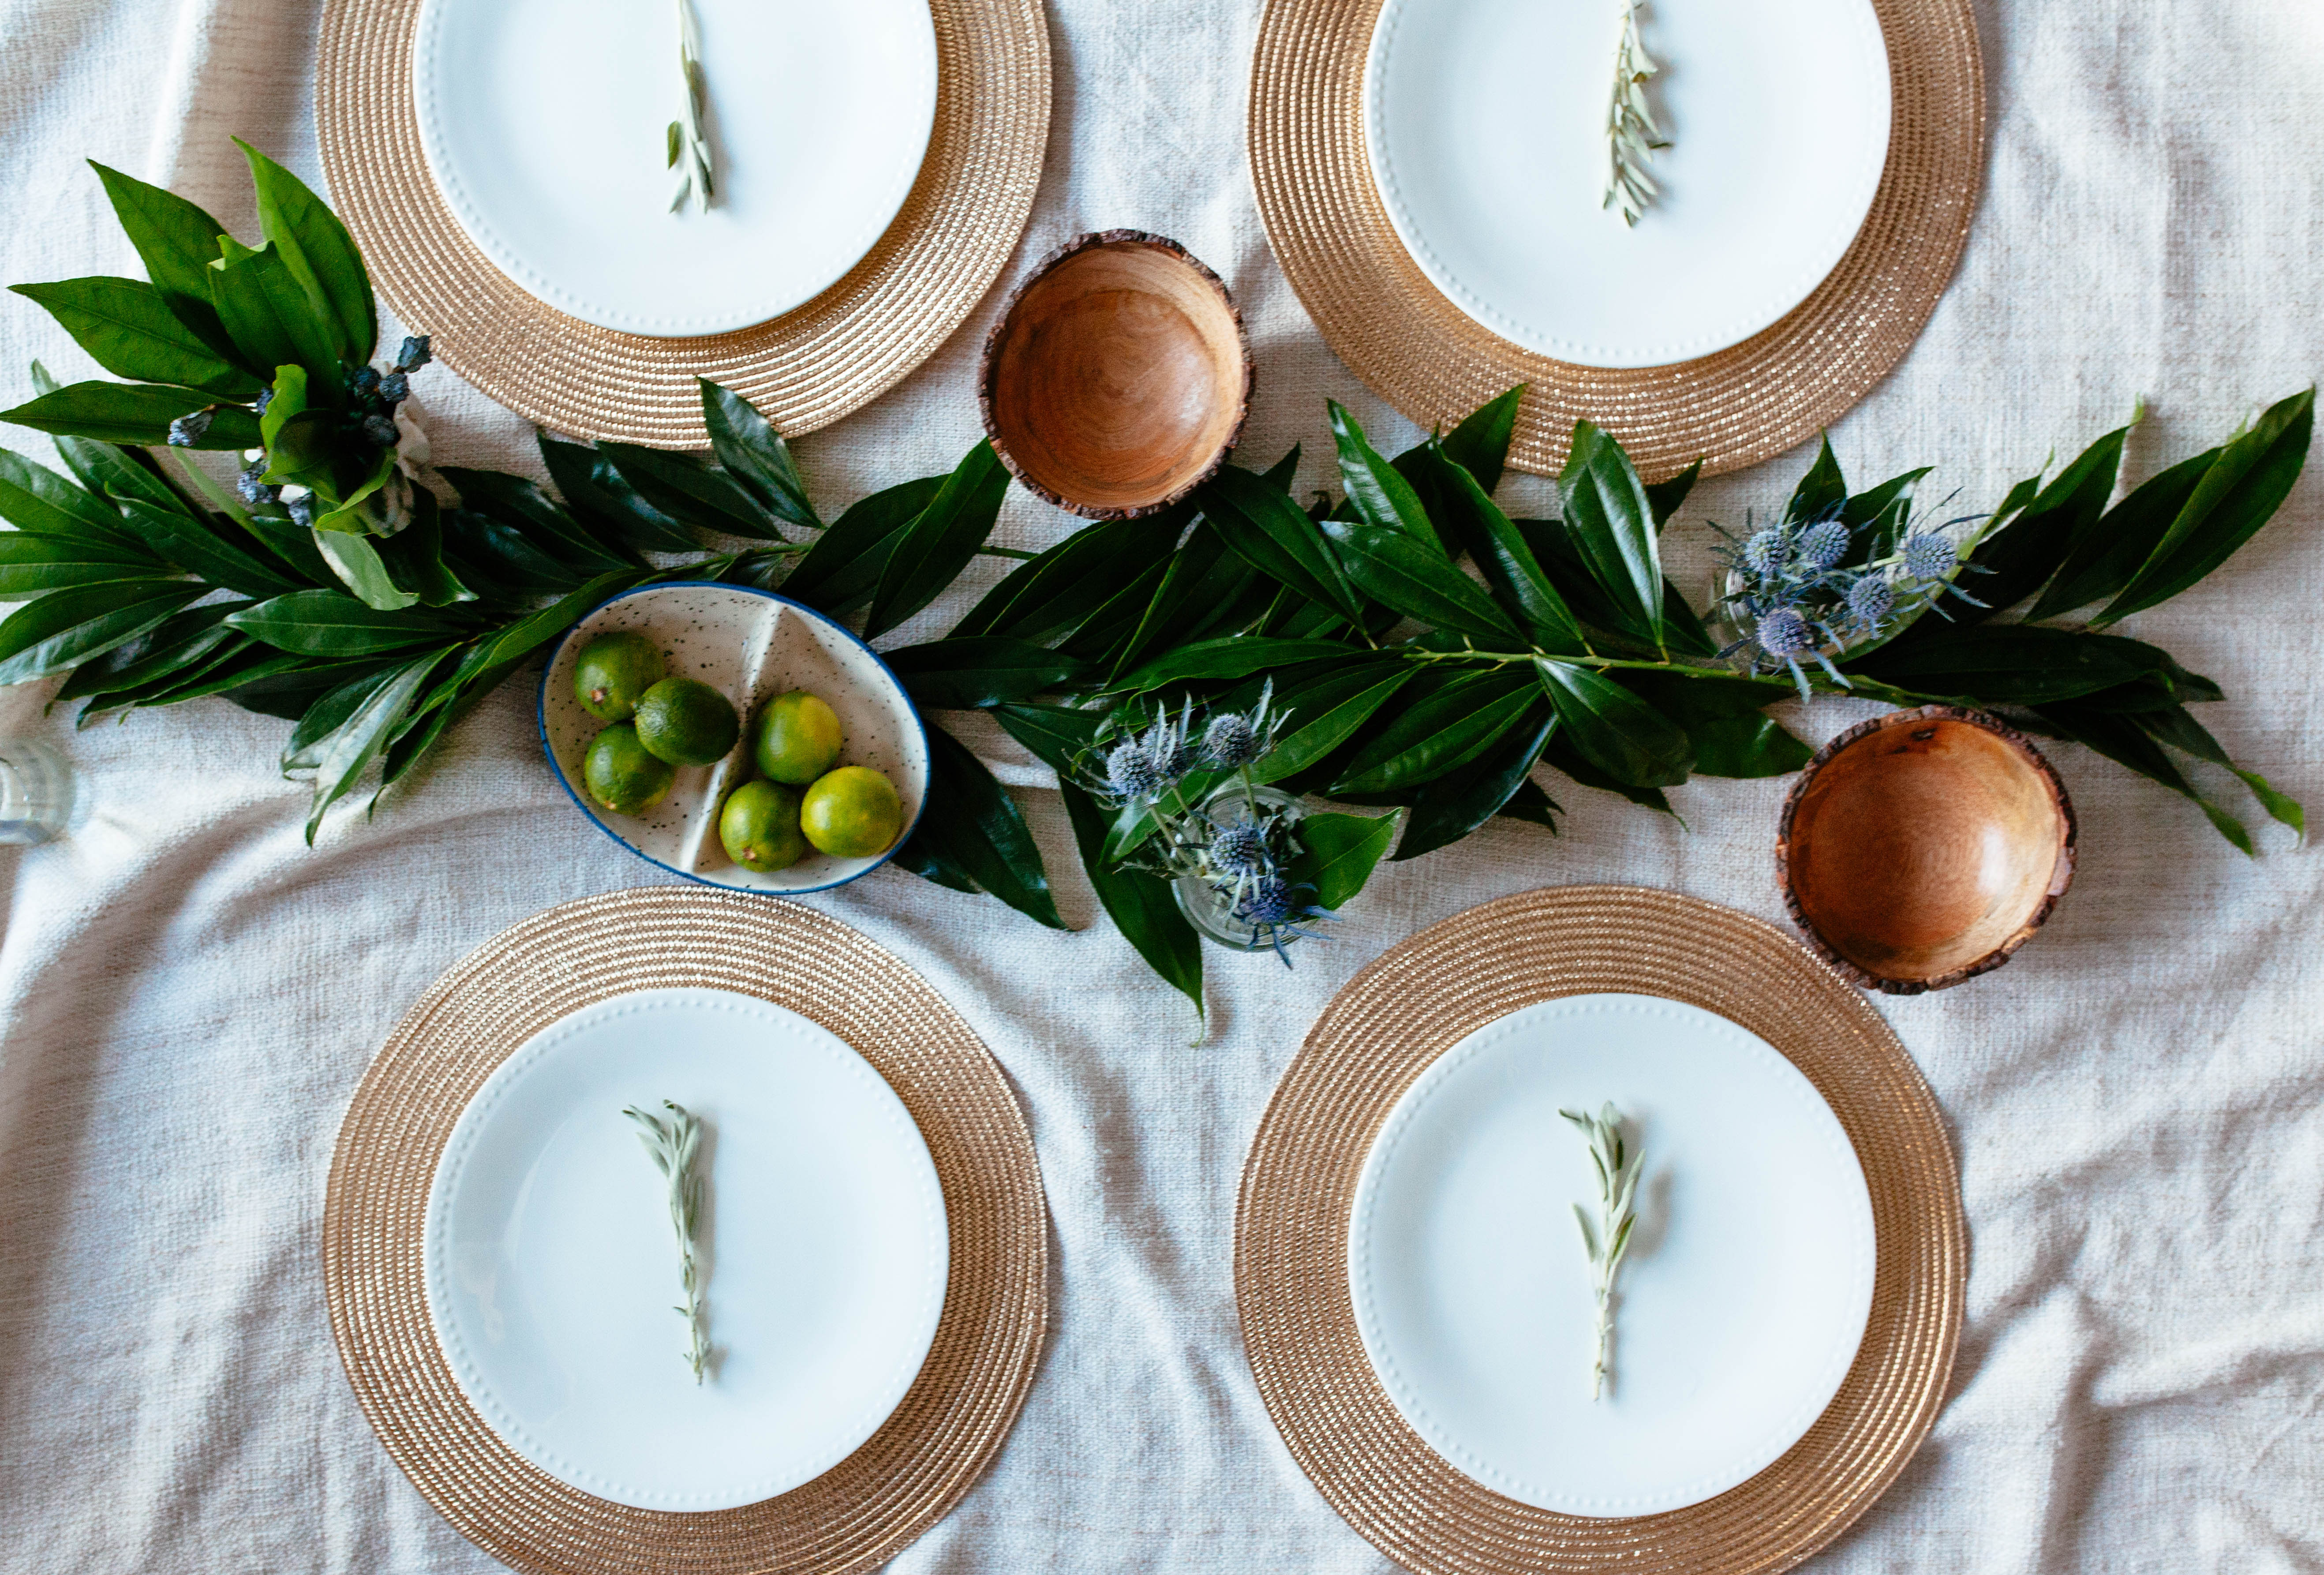 Set up your own fall tablescape for under $50 following Gabi's tips | bygabriella.co